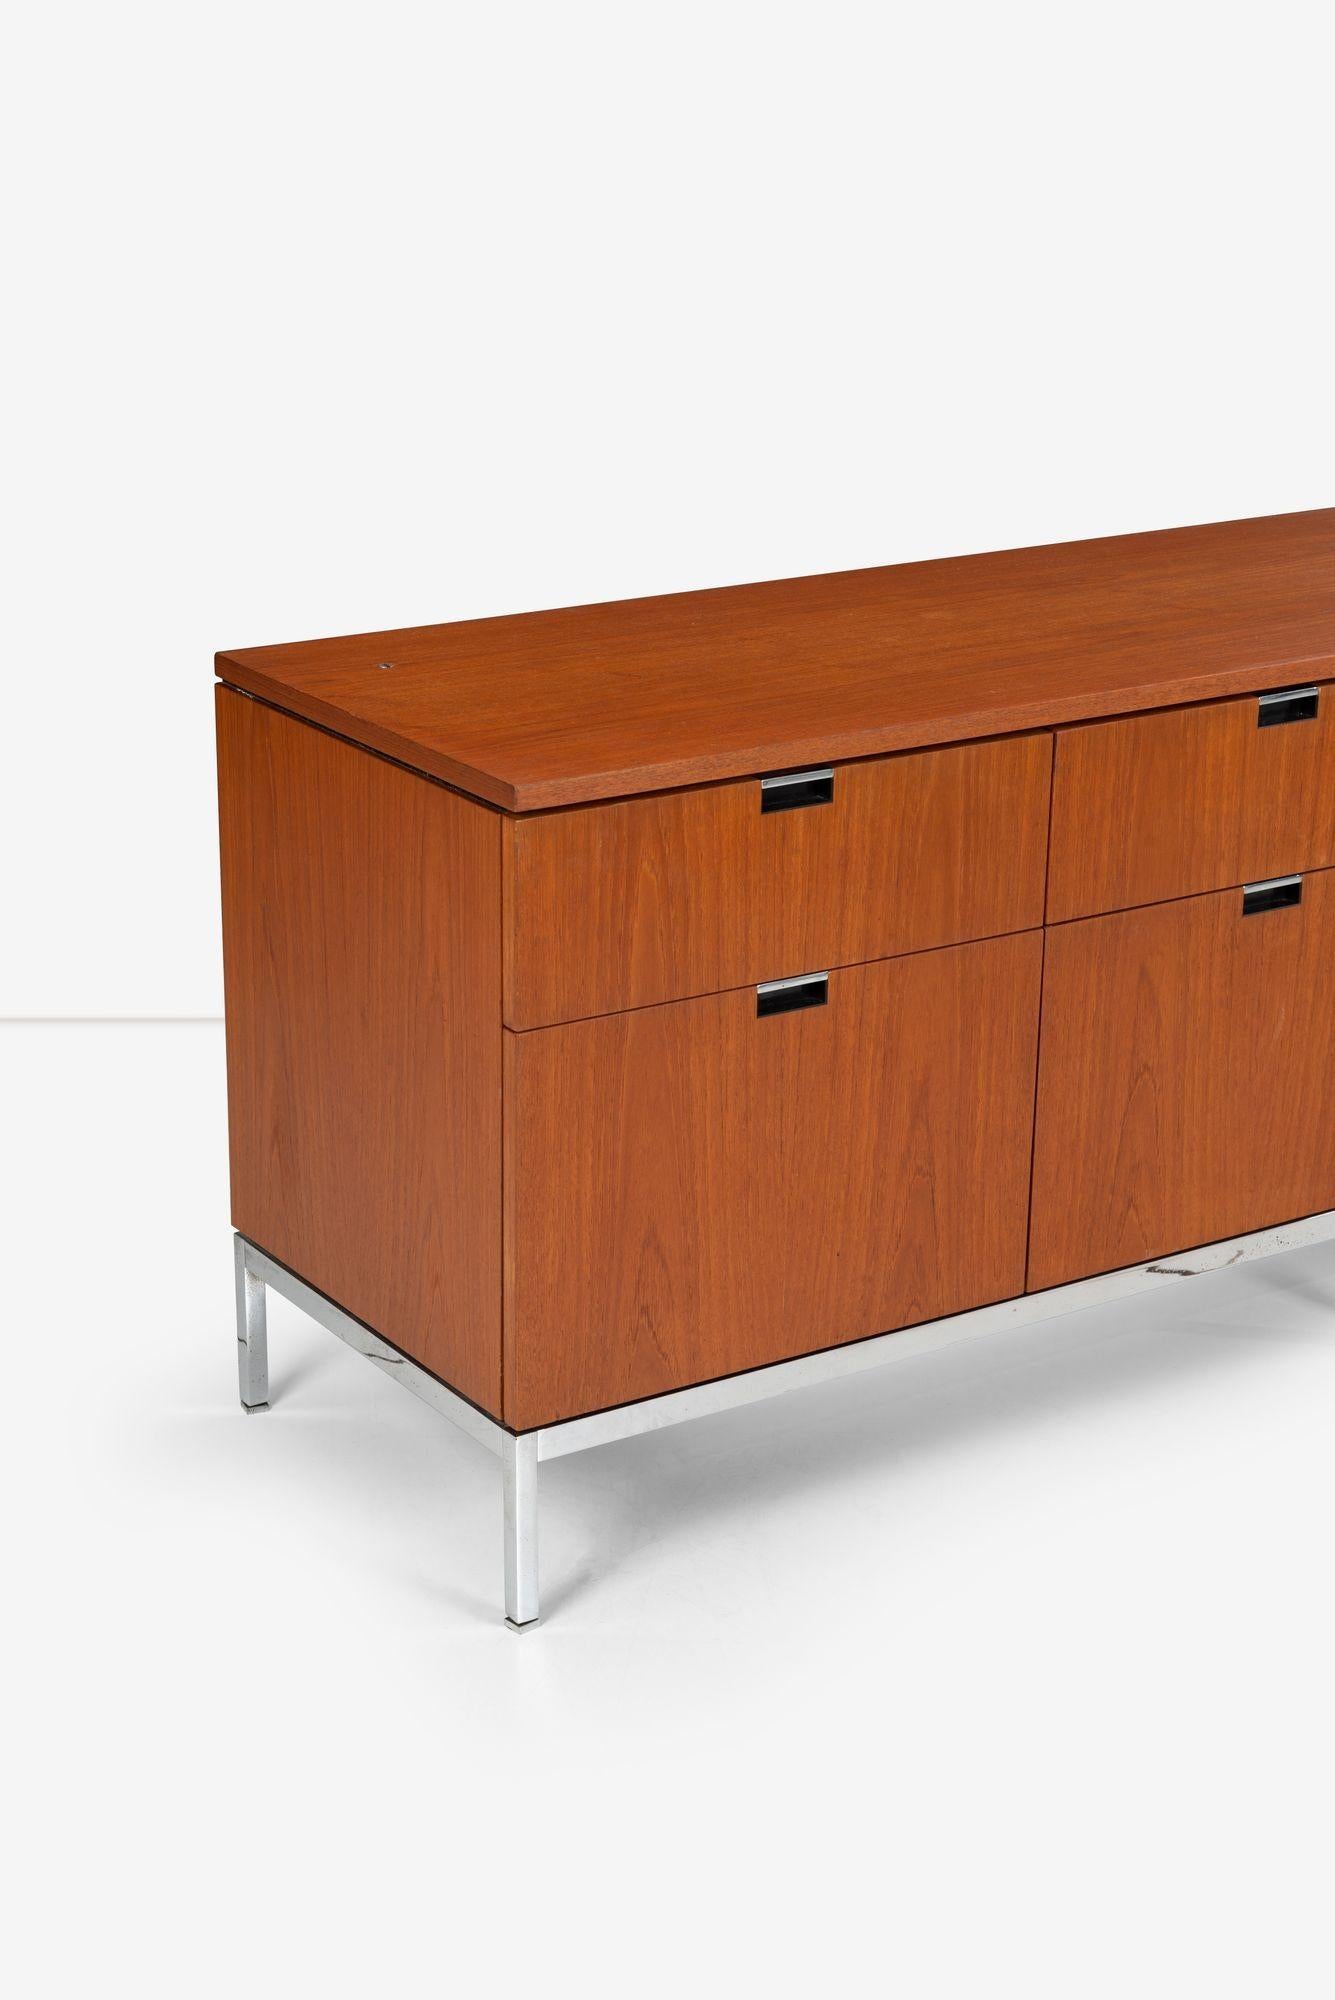 Florence Knoll Eight-Drawer Credenza in Teakwood In Good Condition For Sale In Chicago, IL